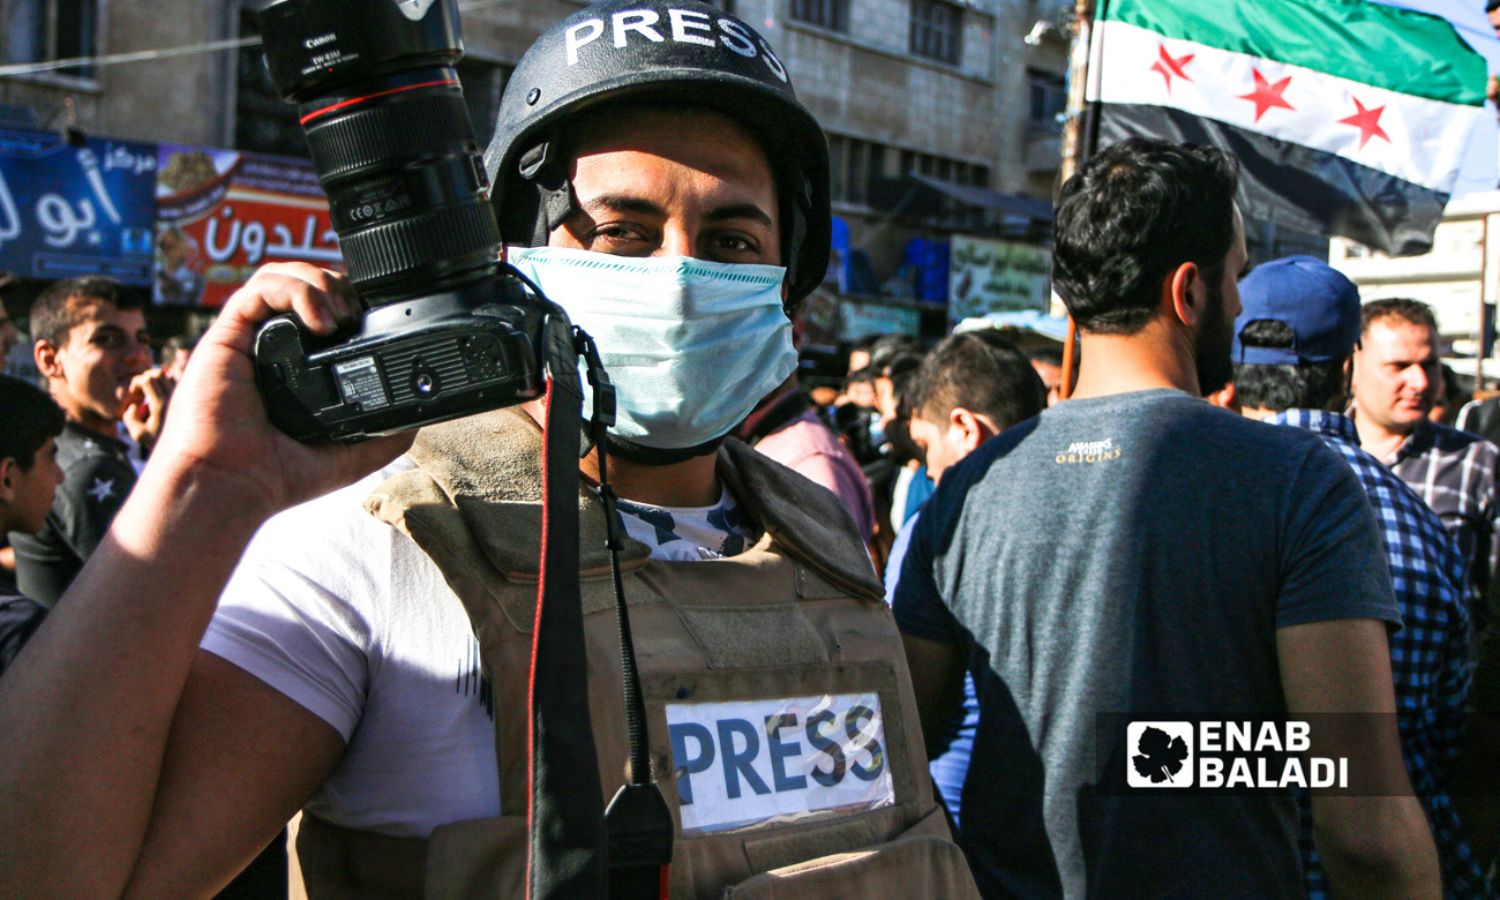 Syrian Journalists Association: 55 Violations Against Media in Syria in 2022